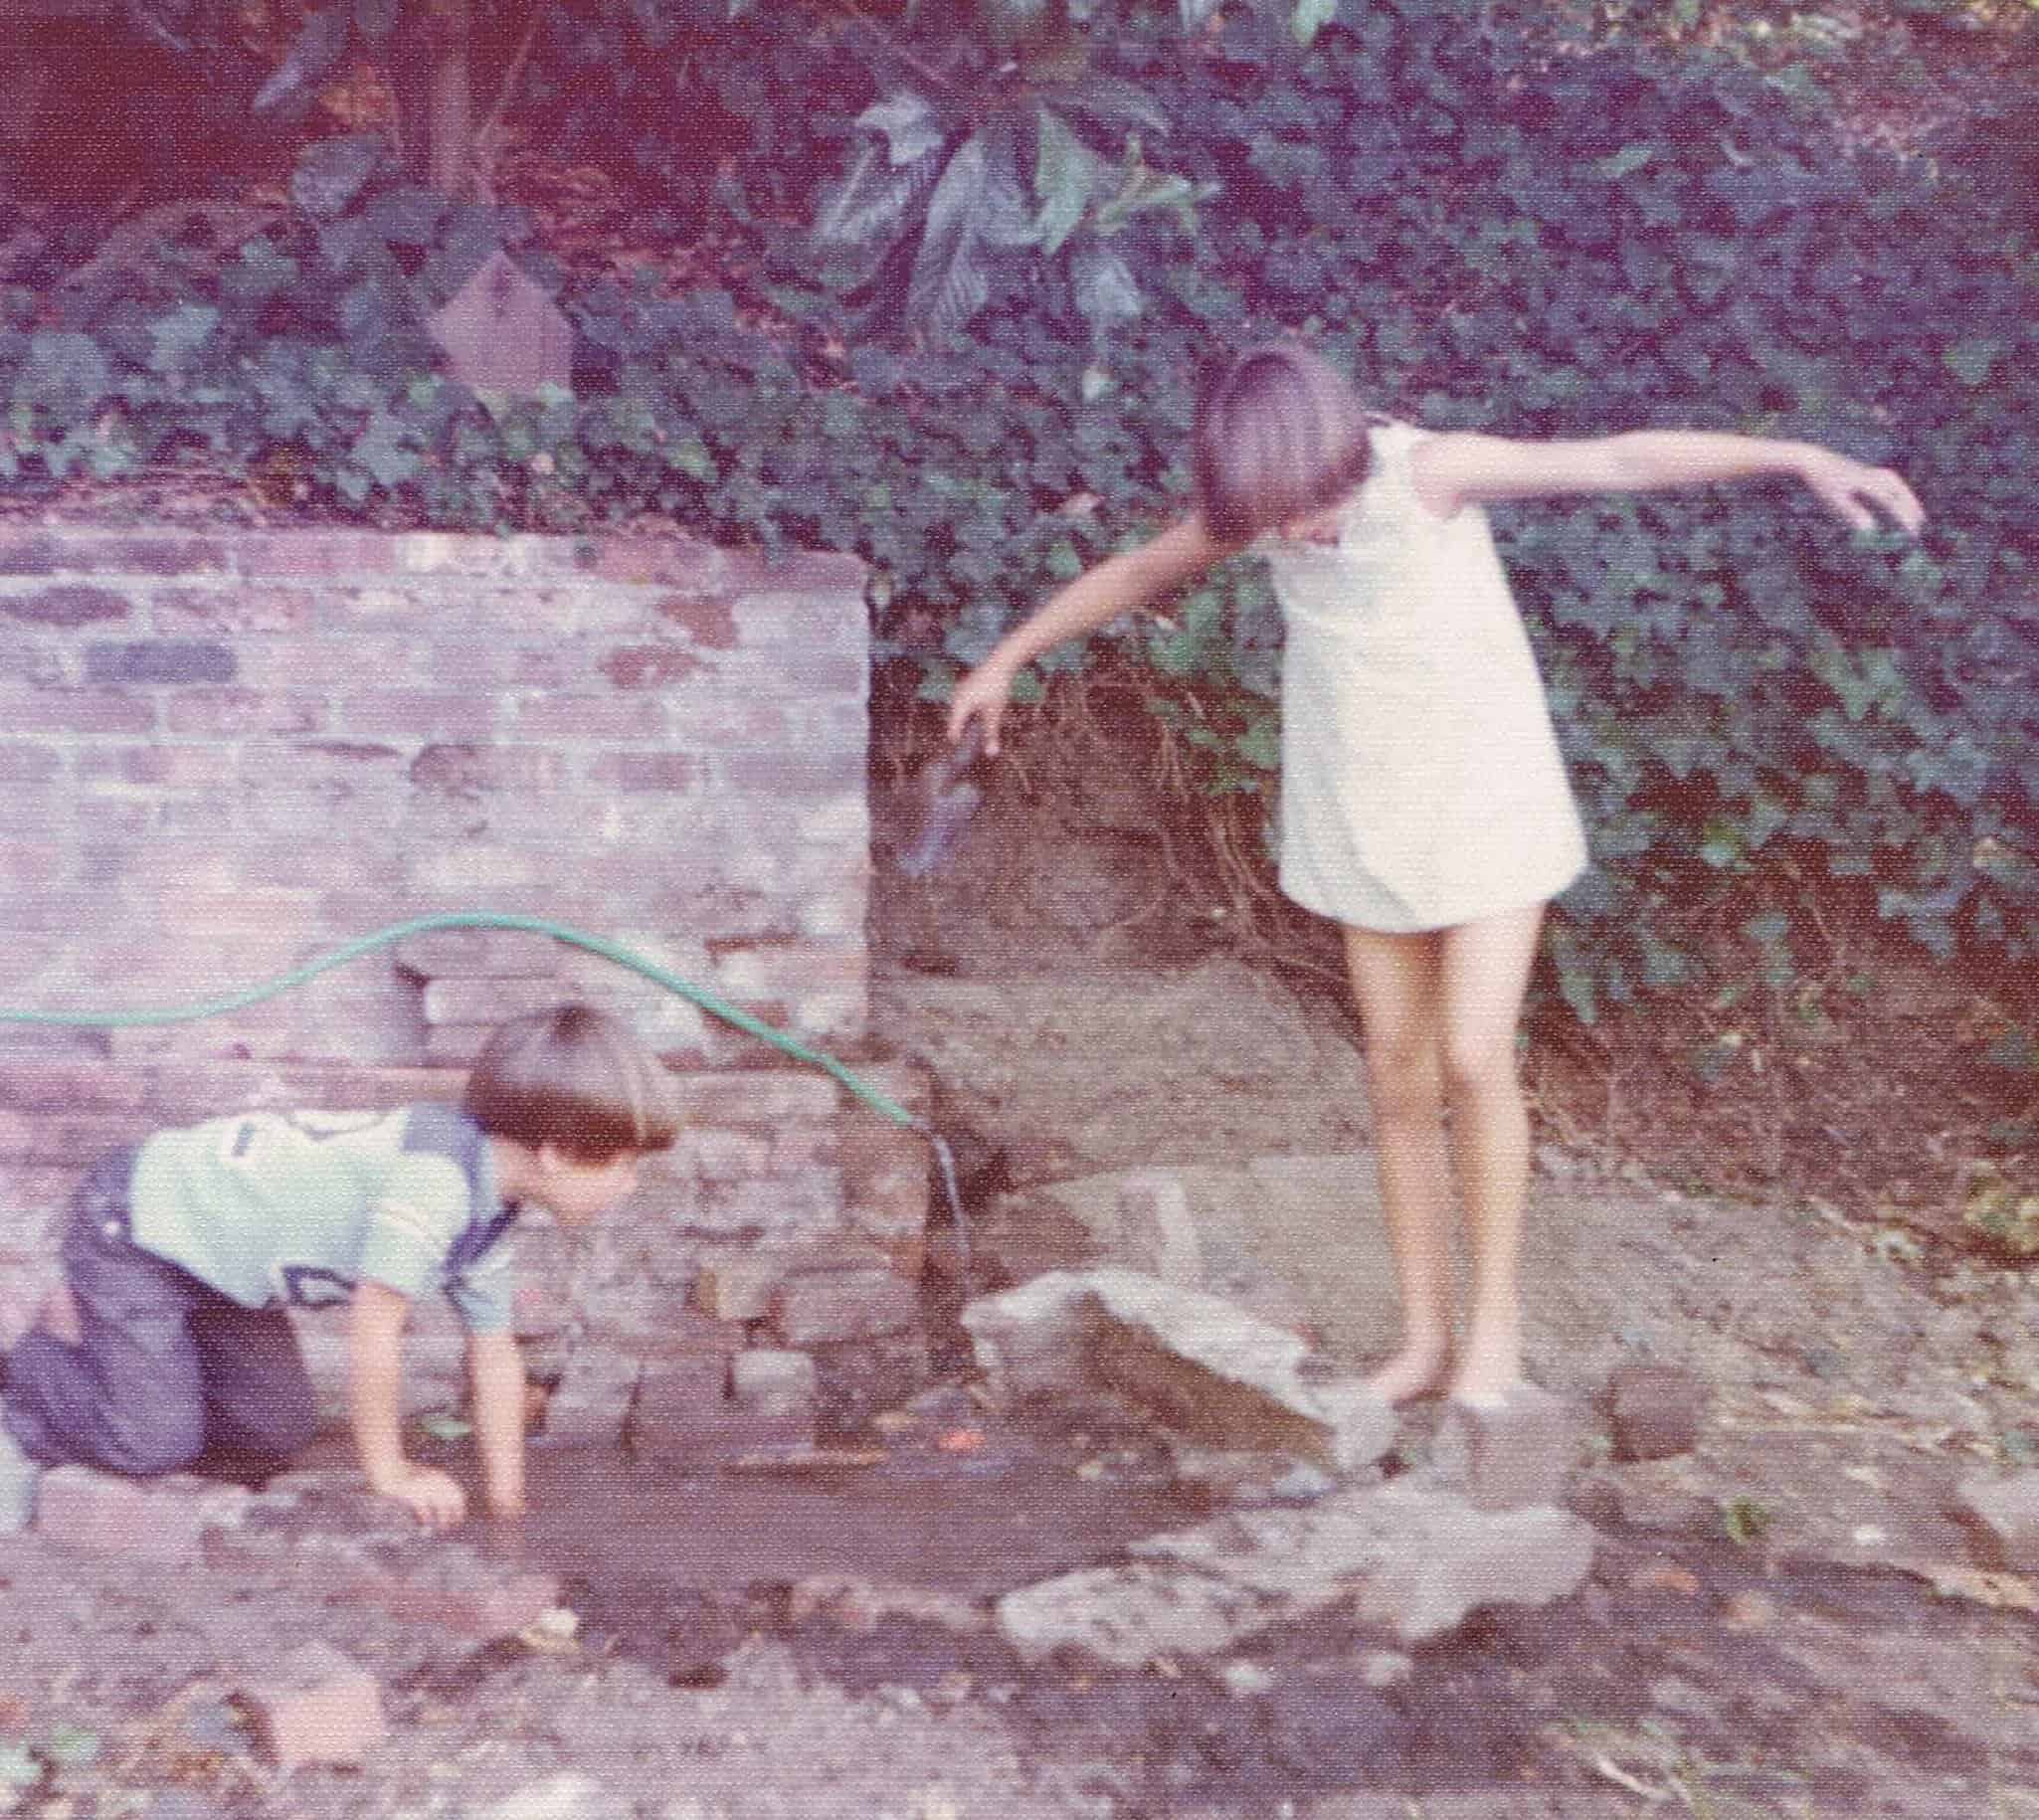 A day playing in the dirt with my brother Rex. Some moments seem to imprint us forever - the free abandon my parents gave us to play and have fun molding the soil has forever removed my fears of mud…